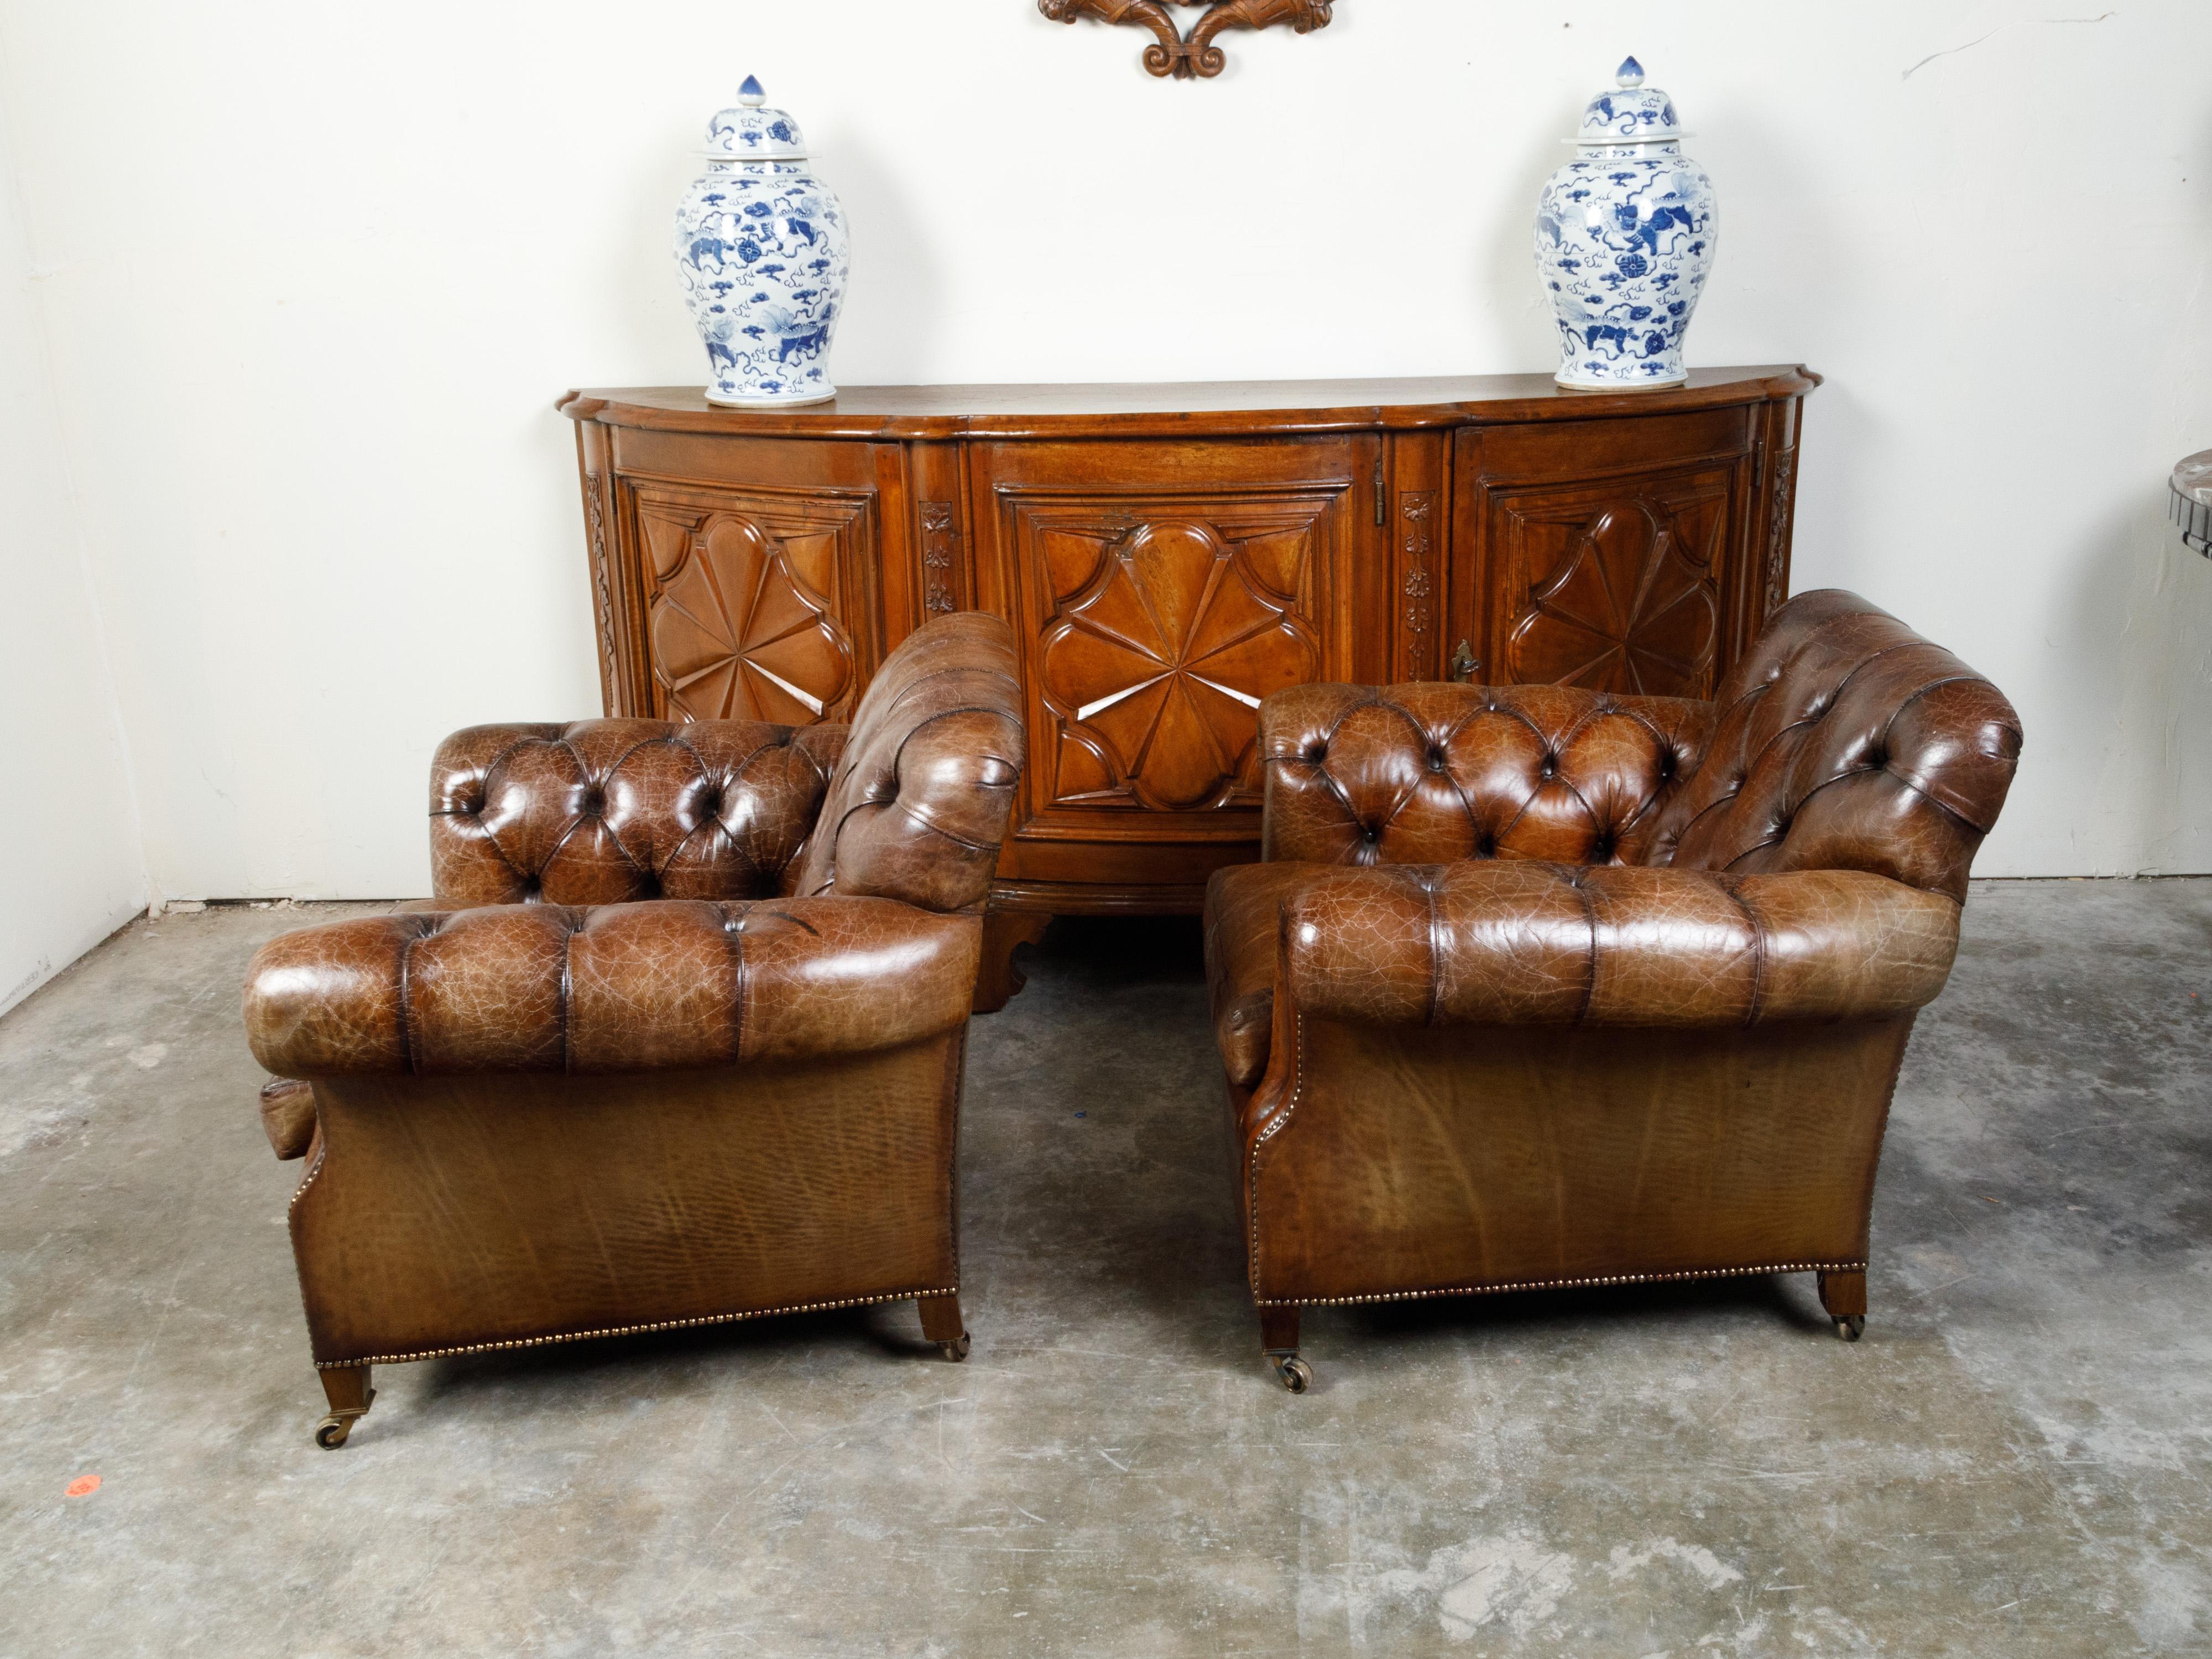 Pair of English Midcentury Tufted Leather Club Chairs with Nailheads and Casters 3